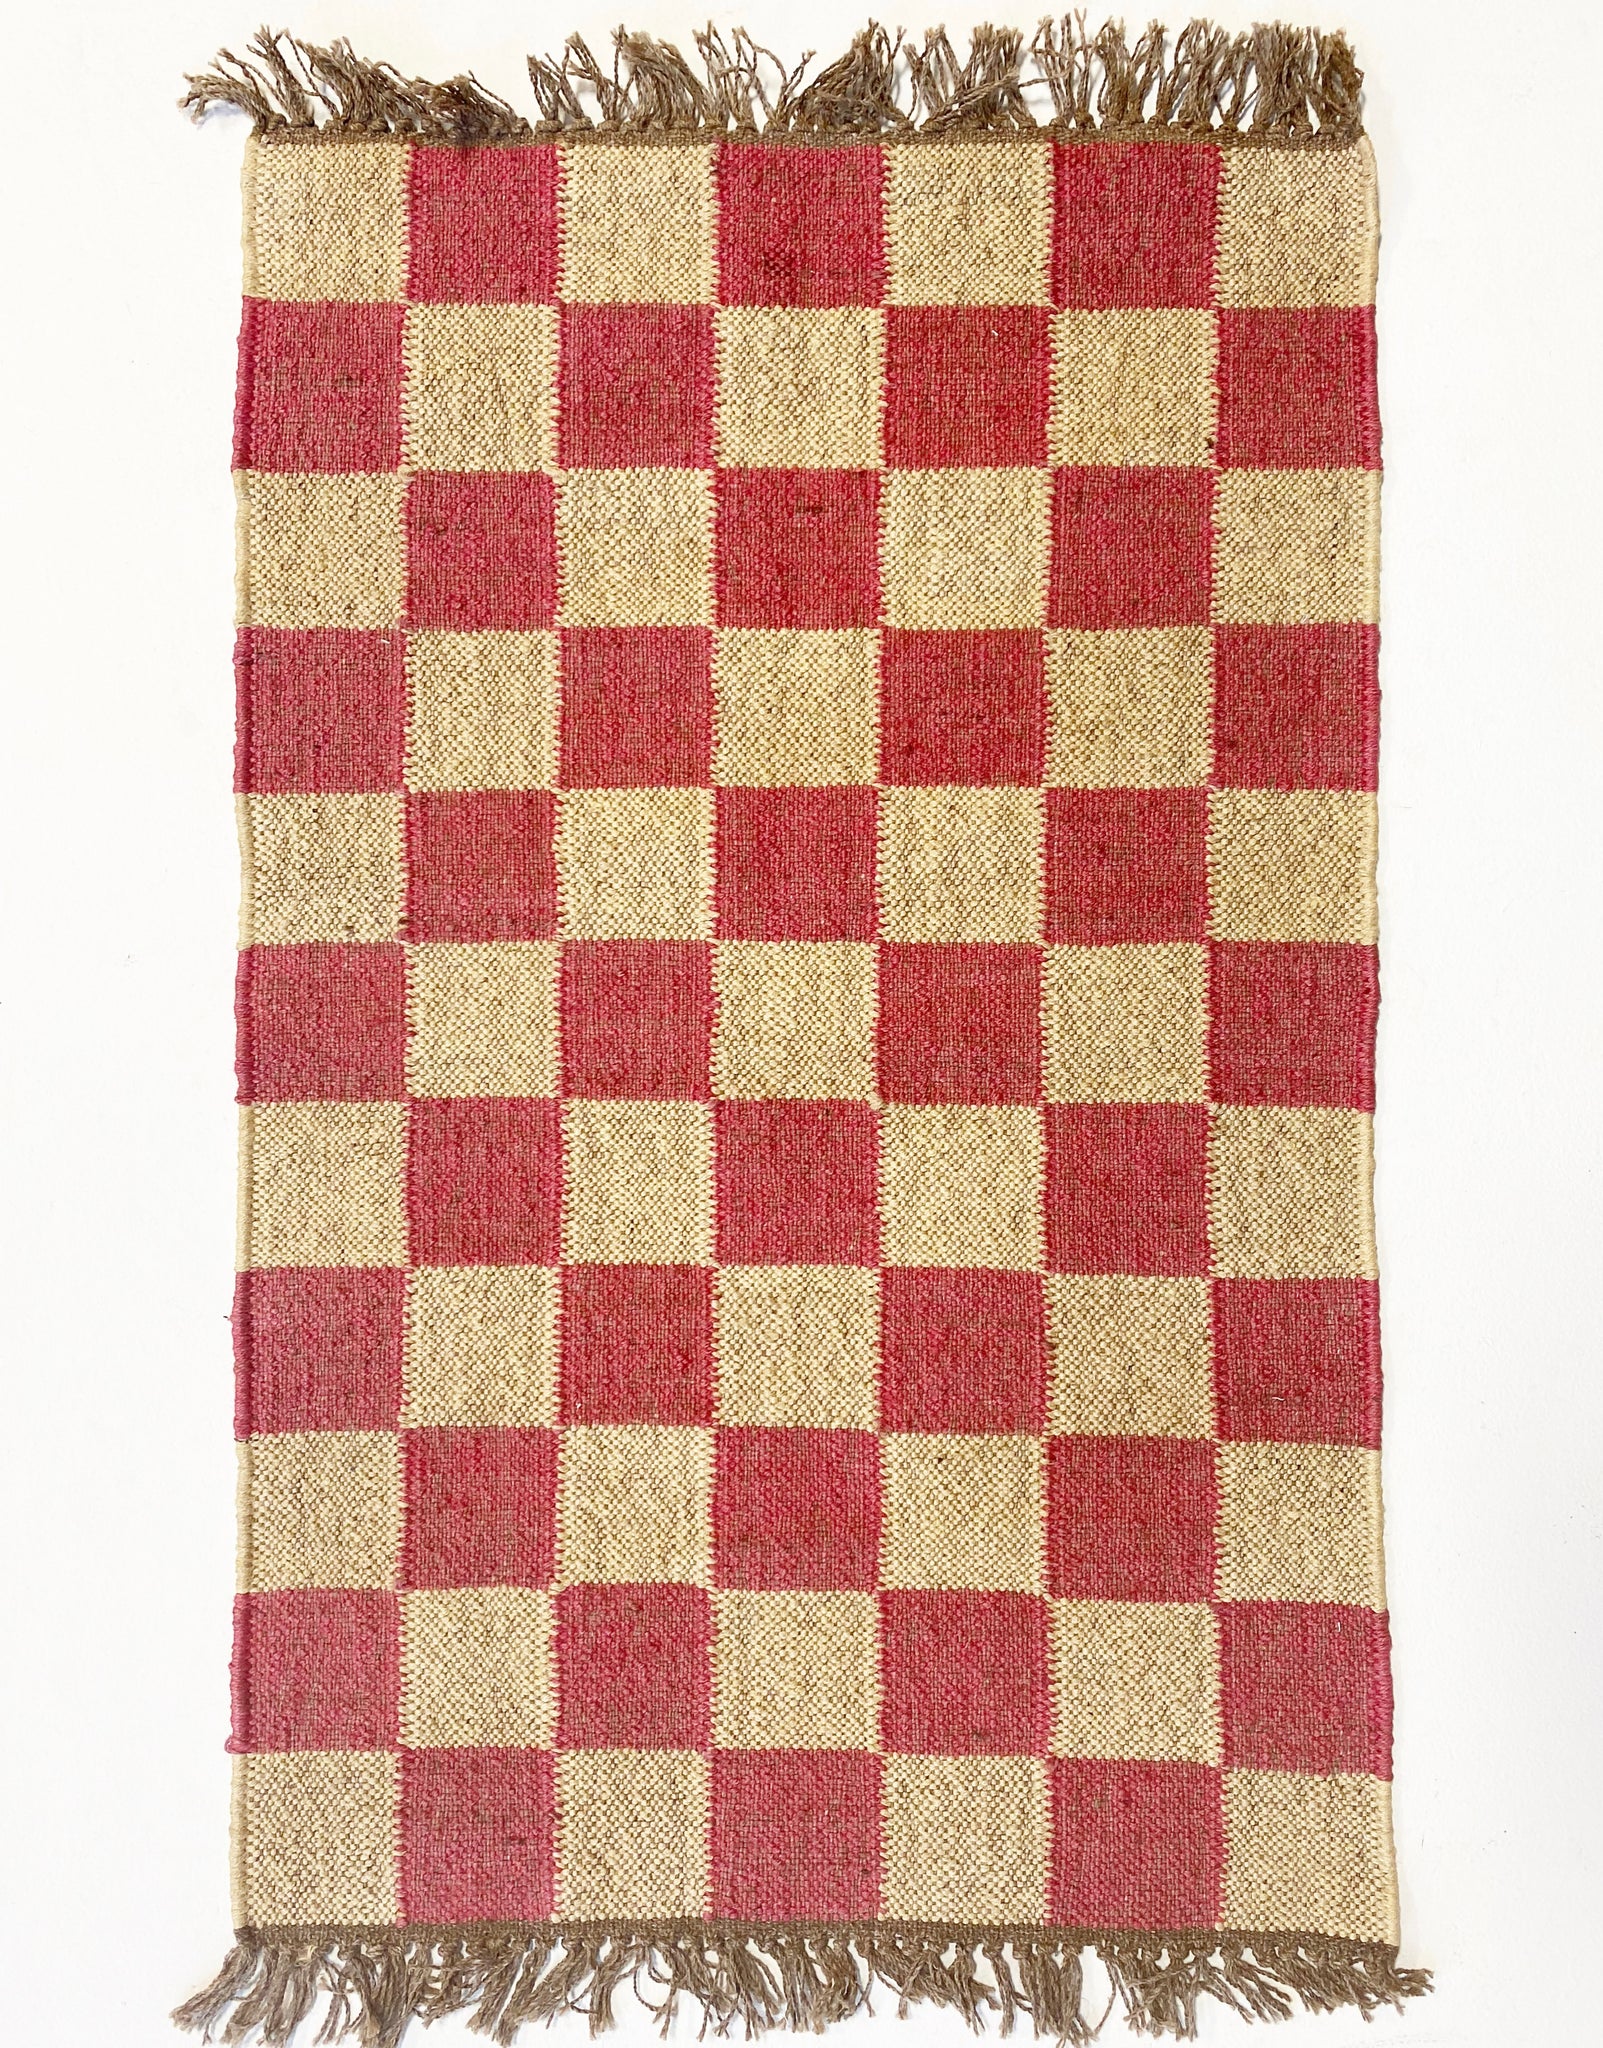 The Forsyth Checkerboard Rug - Hibiscus